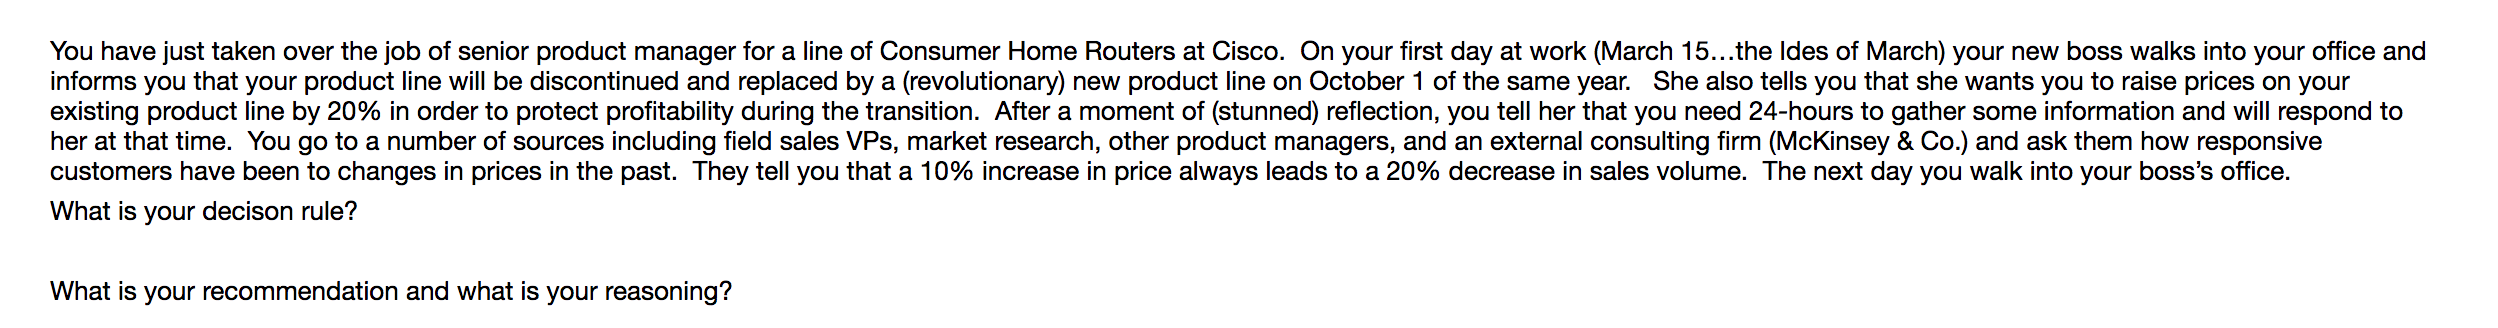 You have just taken over the job of senior product manager for a line of Consumer Home Routers at Cisco. On your first day at work (March 15...the ldes of March) your new boss walks into your office and
informs you that your product line will be discontinued and replaced by a (revolutionary) new product line on October 1 of the same year. She also tells you that she wants you to raise prices on your
existing product line by 20% in order to protect profitability during the transition. After a moment of (stunned) reflection, you tell her that you need 24-hours to gather some information and wil respond to
her at that time. You go to a number of sources including field sales VPs, market research, other product managers, and an external consulting firm (McKinsey & Co.) and ask them how responsive
customers have been to changes in prices in the past. They tell you that a 10% increase in price always leads to a 20% decrease in sales volume. The next day you walk into your boss's office.
What is your decison rule?
What is your recommendation and what is your reasoning?
